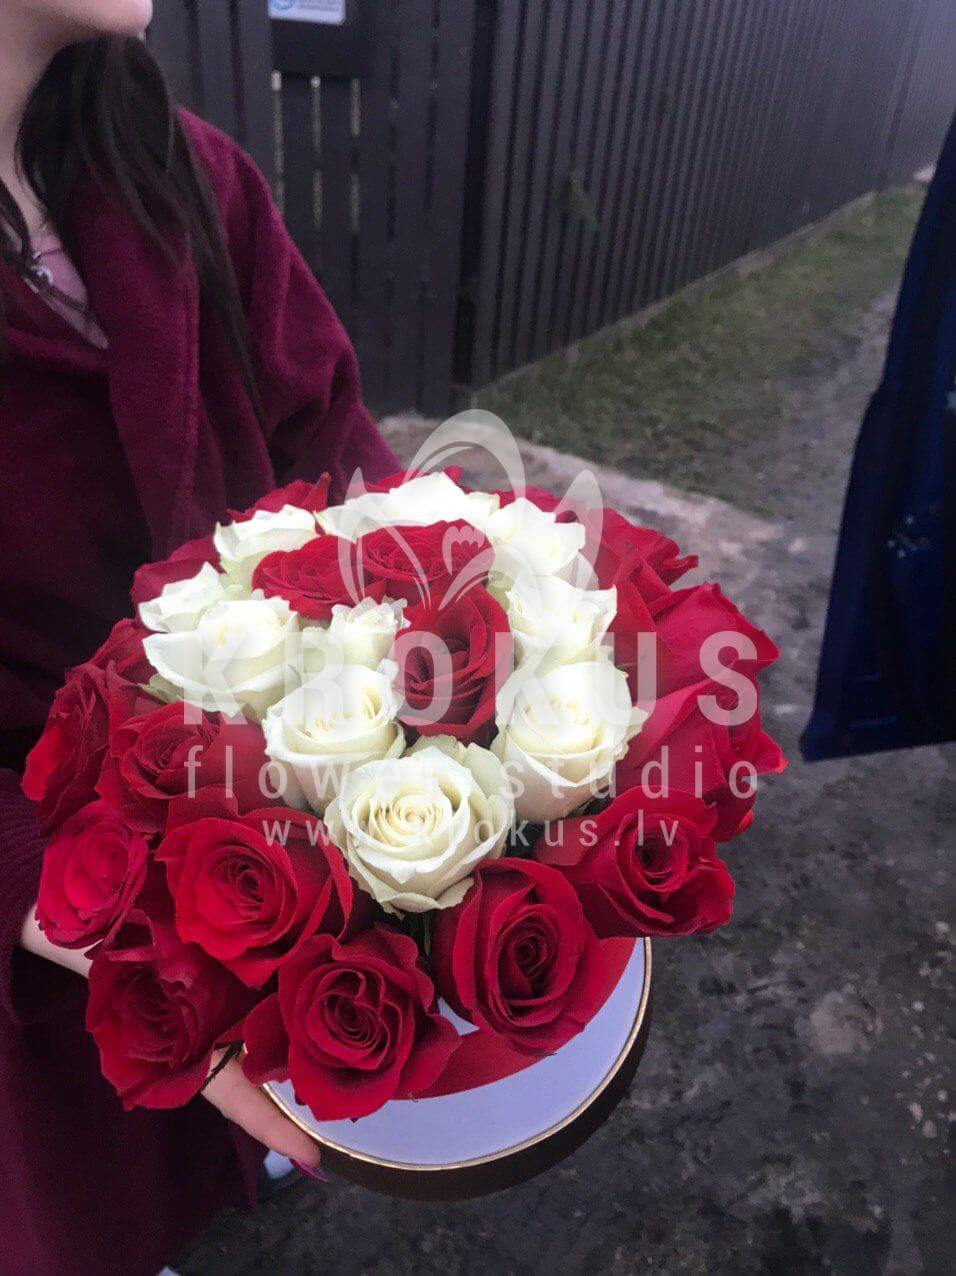 Deliver flowers to Jēkabpils (stylish boxwhite rosesred roses)